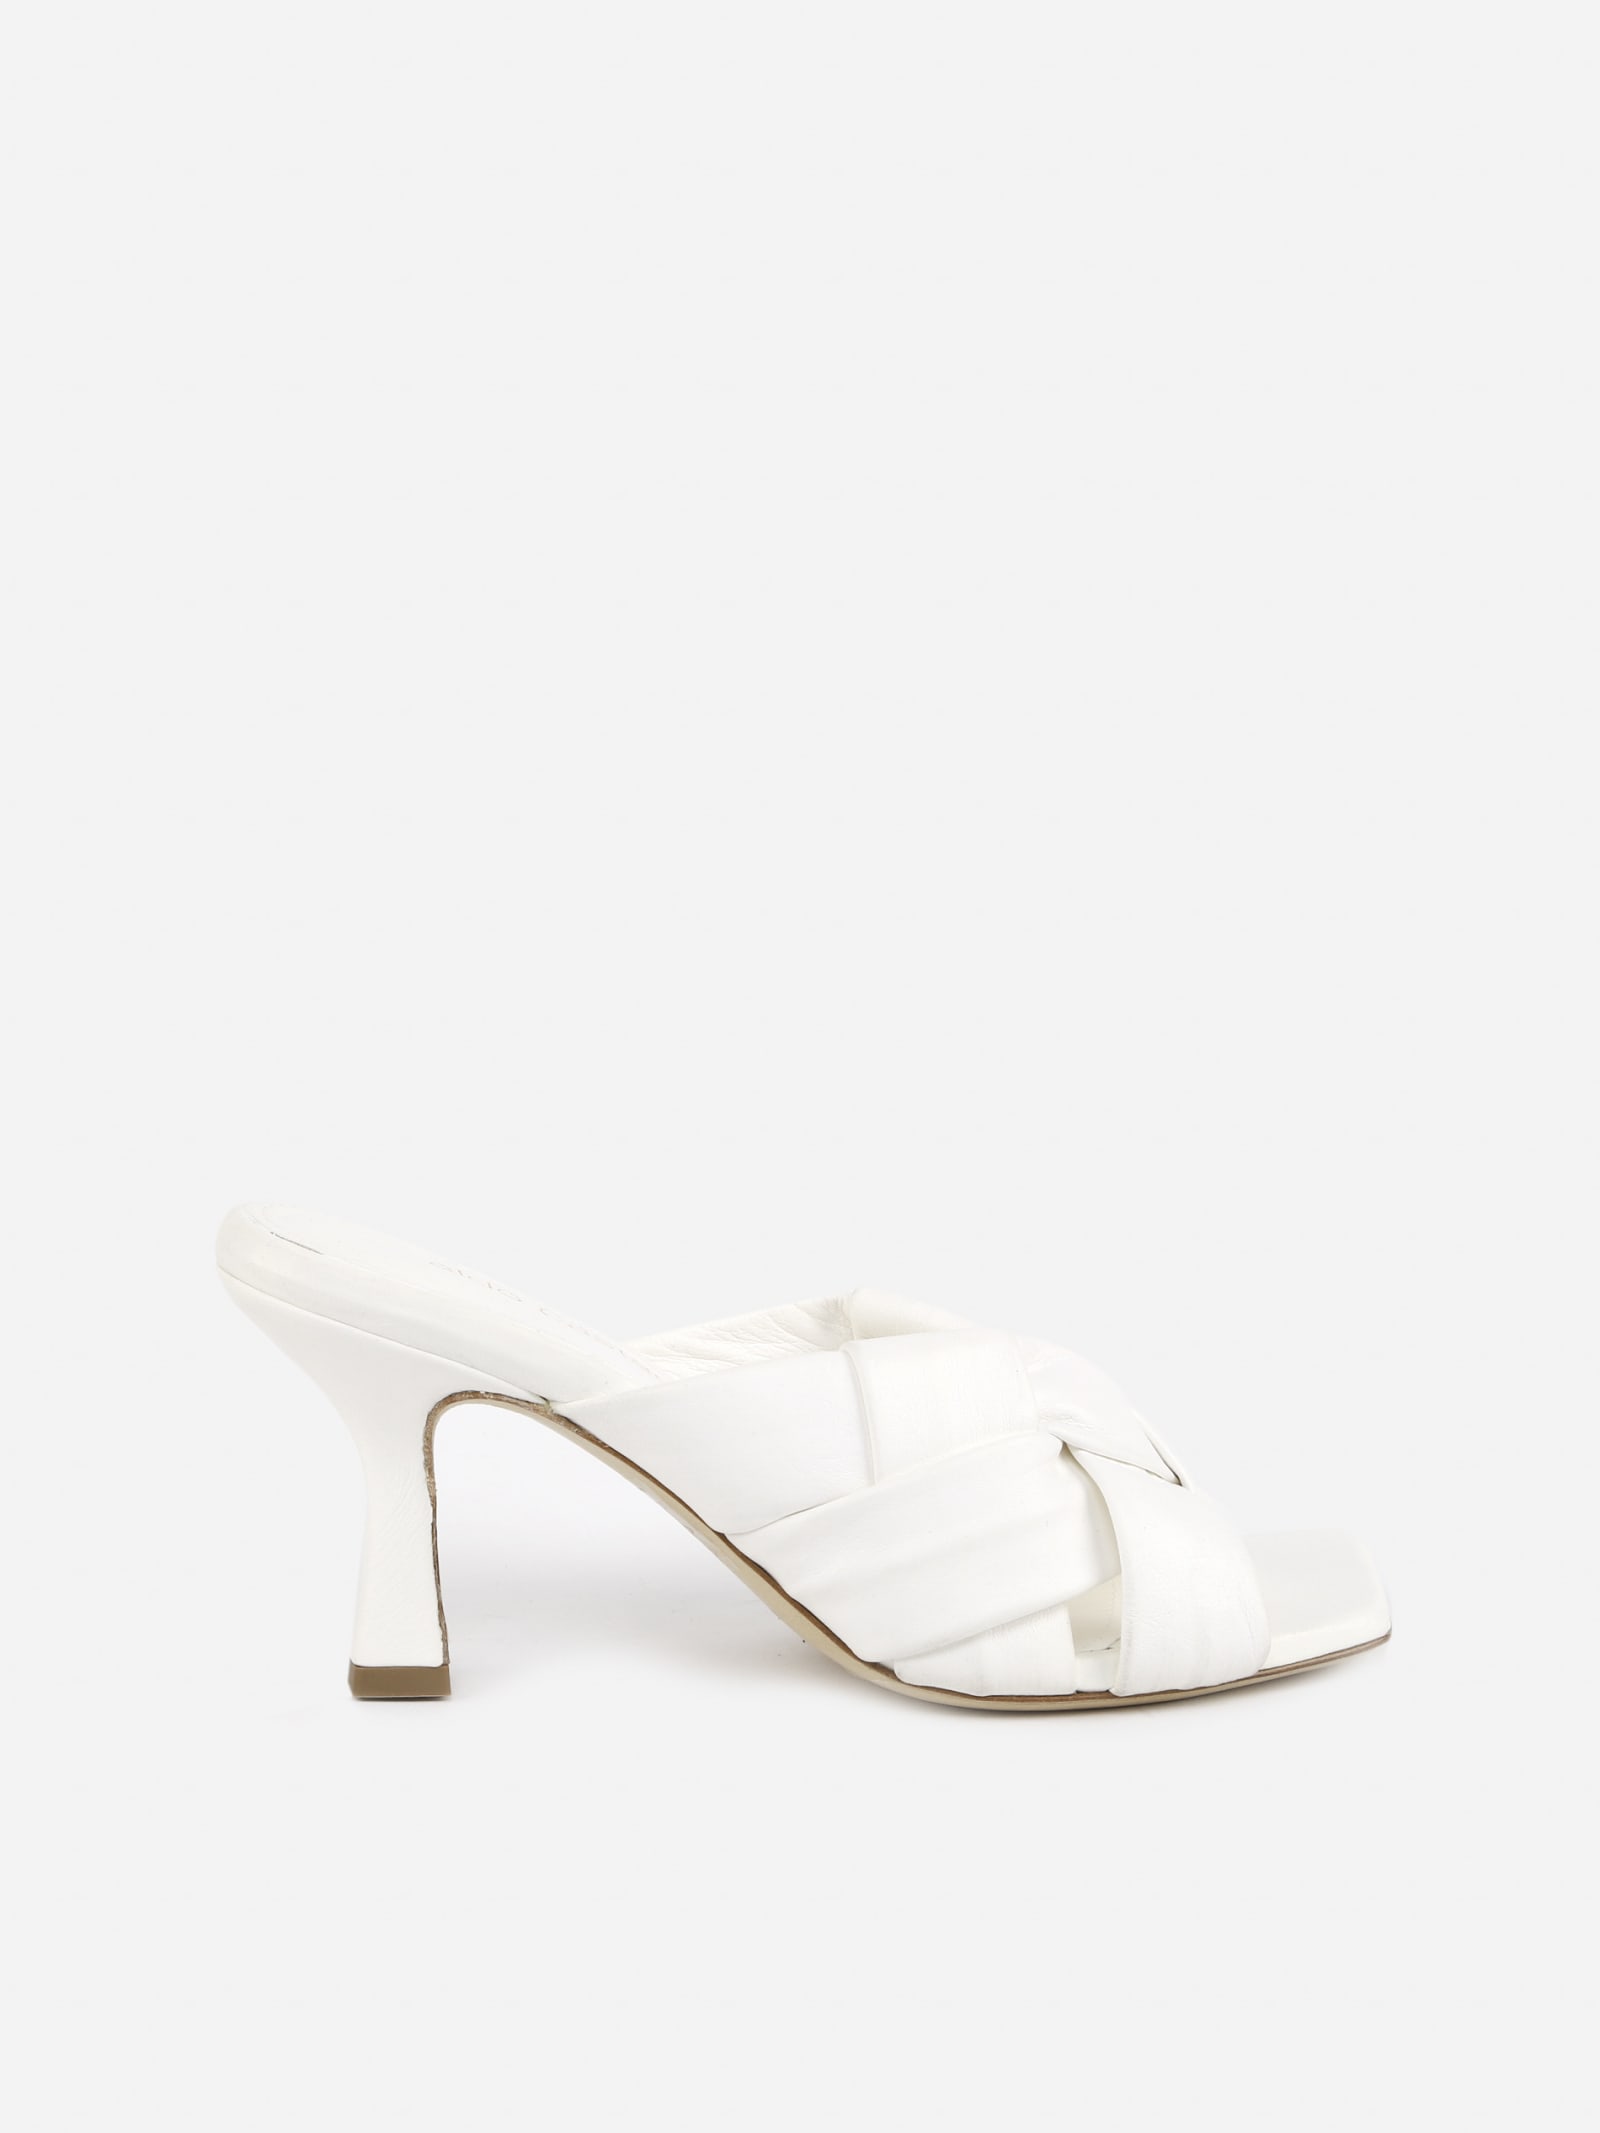 Aldo Castagna Flora Sandals In Leather With Woven Pattern In White